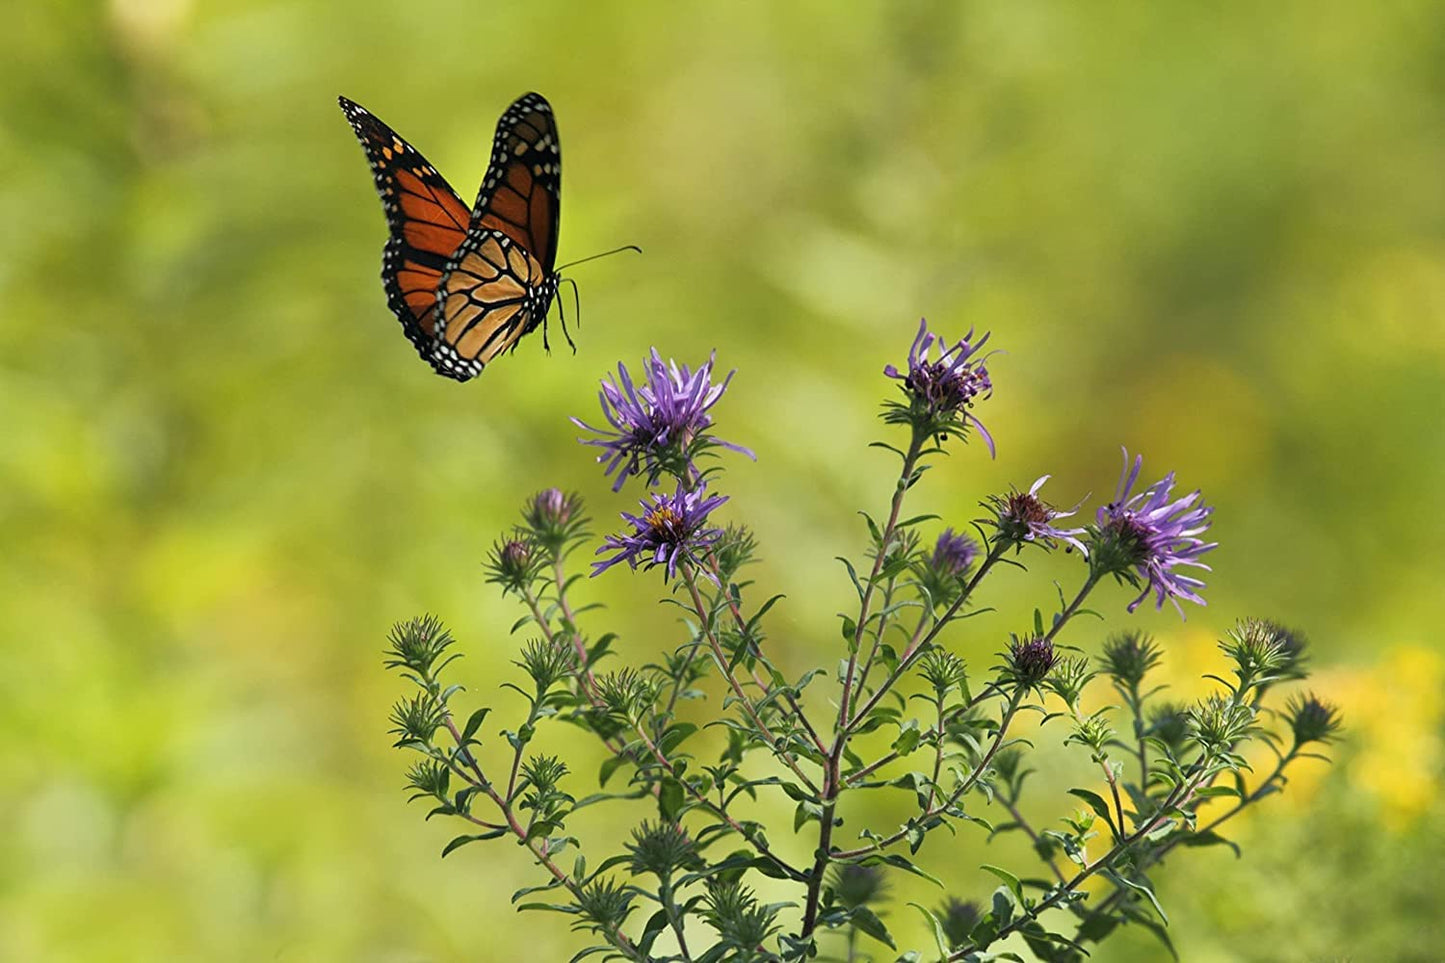 Hundredfold Canada Keystone Wildflower Seed Mix to Support Native Pollinators & Specialist Bees, Seeds Containing New England Aster, Gray Goldenrod & Maximilian Sunflower, Attract Beneficial Bees, Moths and Butterflies